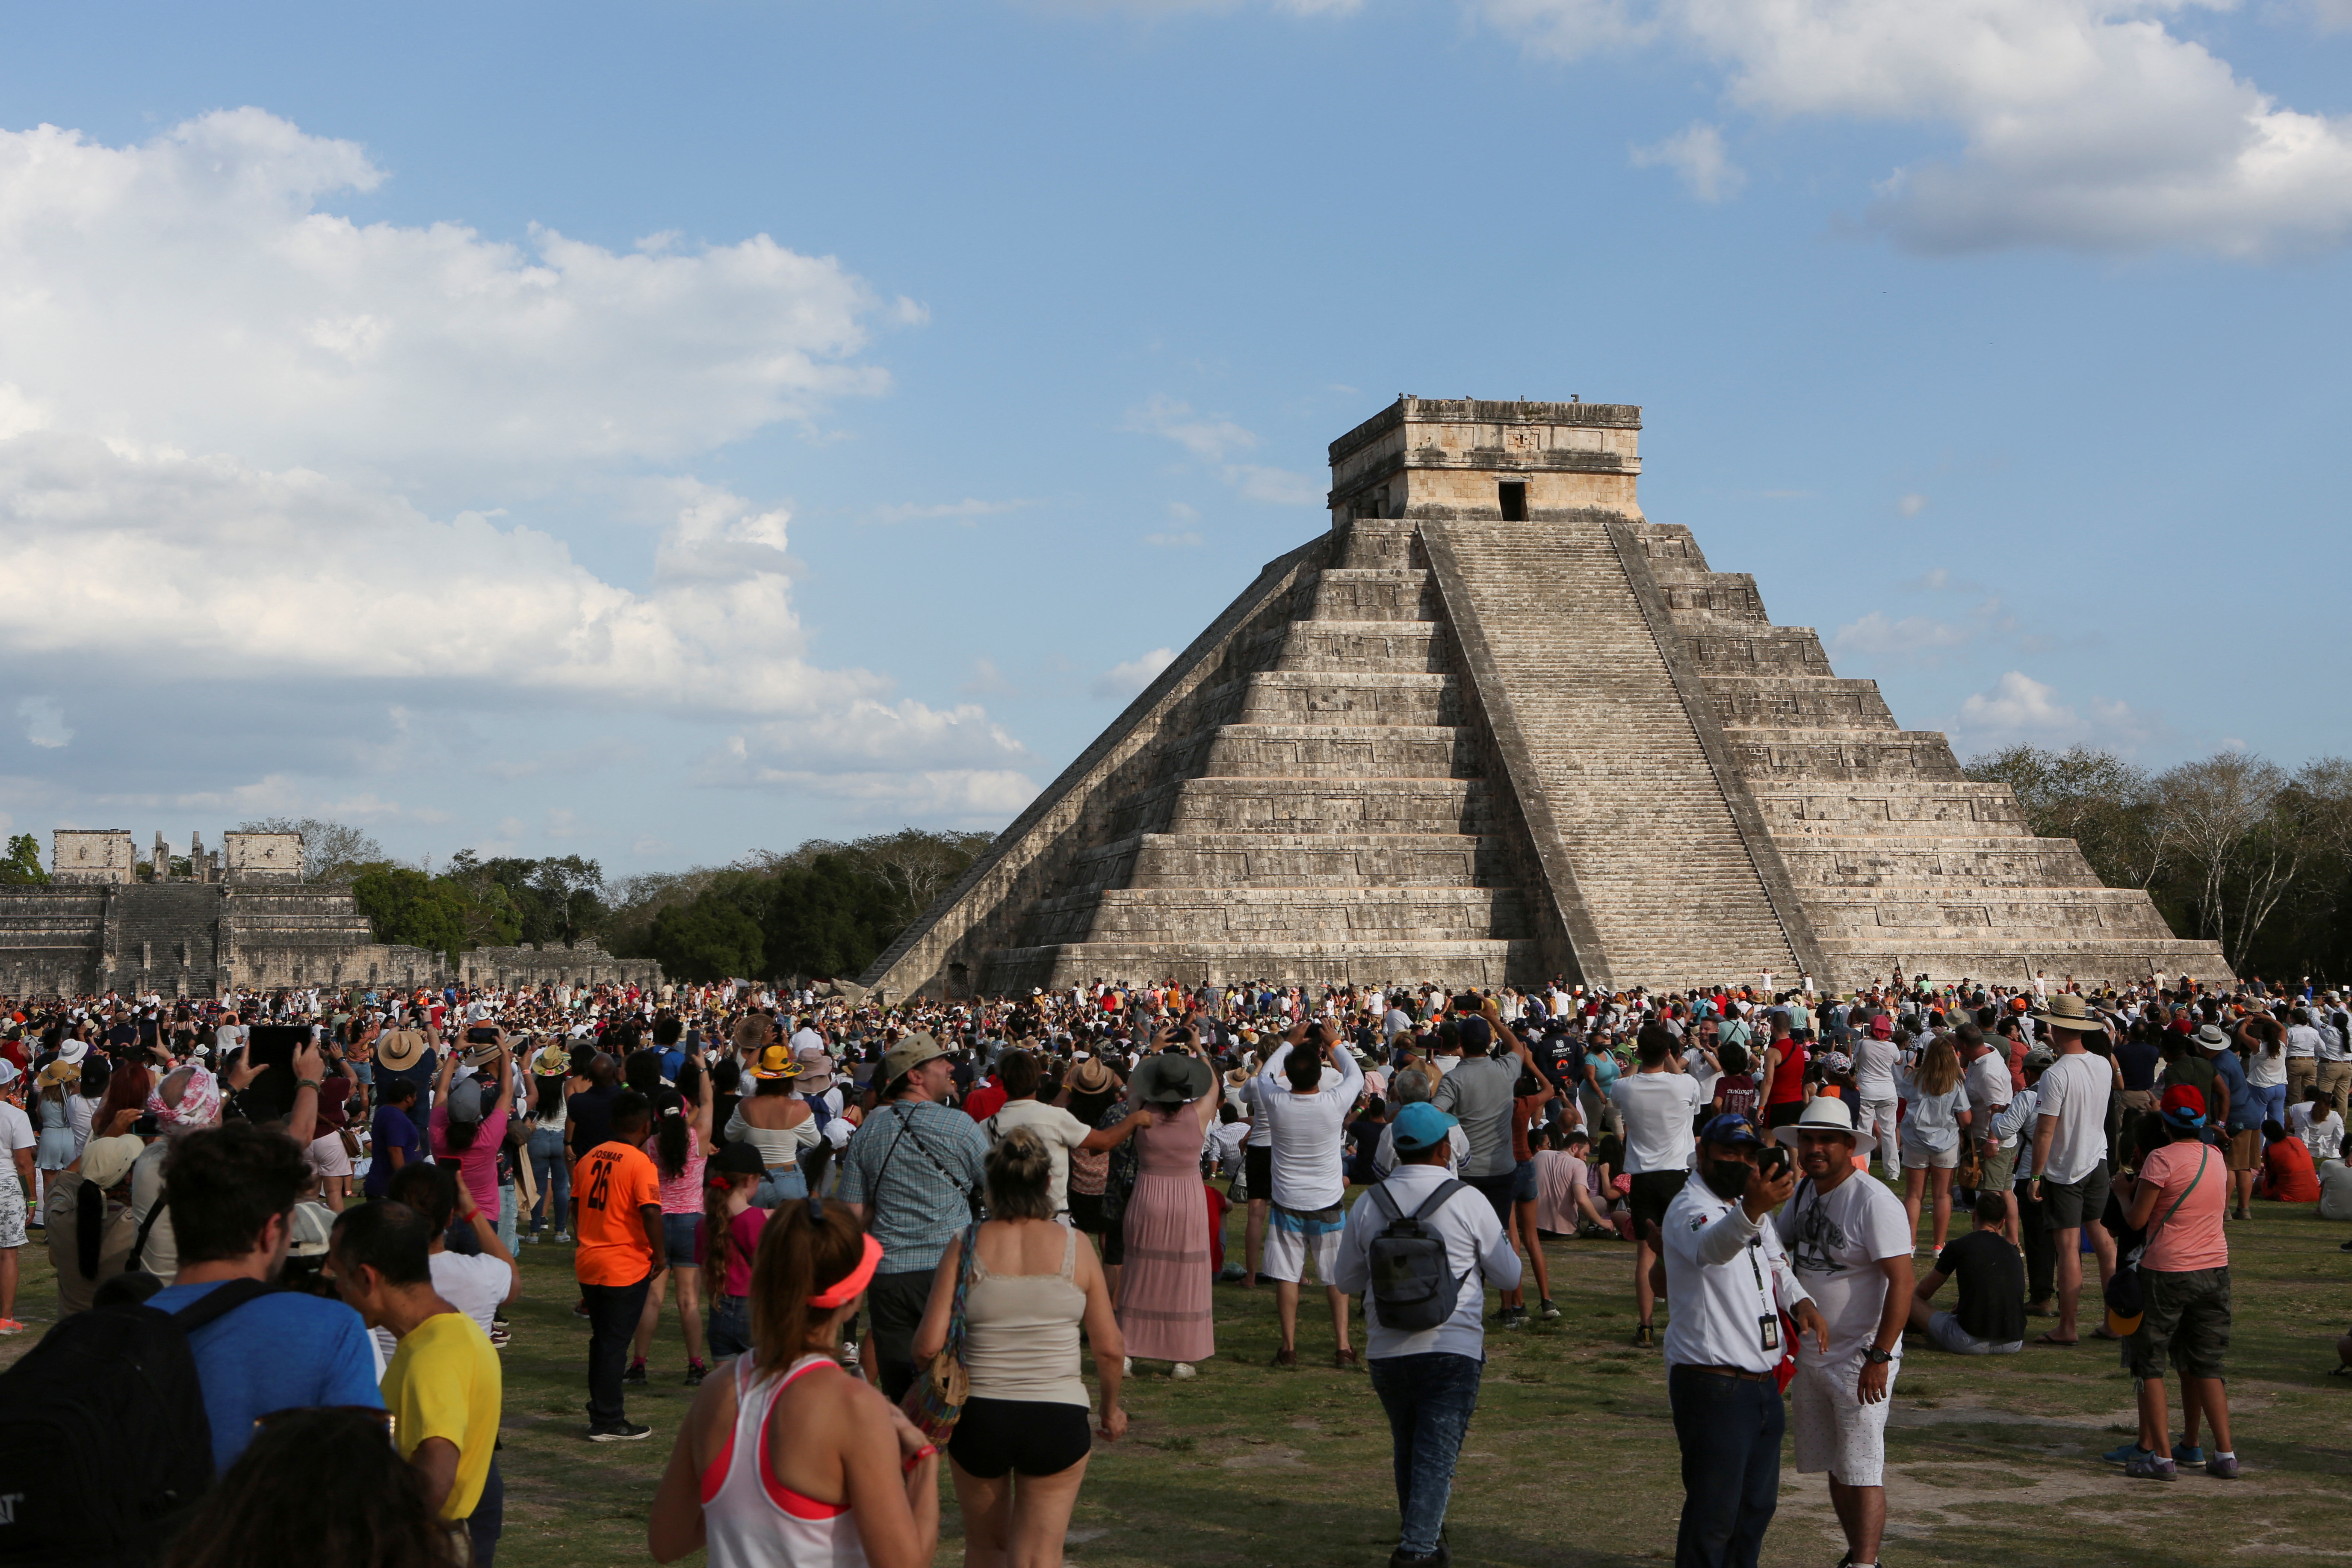 People gather at the archaeological zone of Chichen Itza to celebrate the Spring Equinox, in Yucatan state, Mexico March 21, 2022. Picture taken March 21, 2022. REUTERS/Lorenzo Hernandez